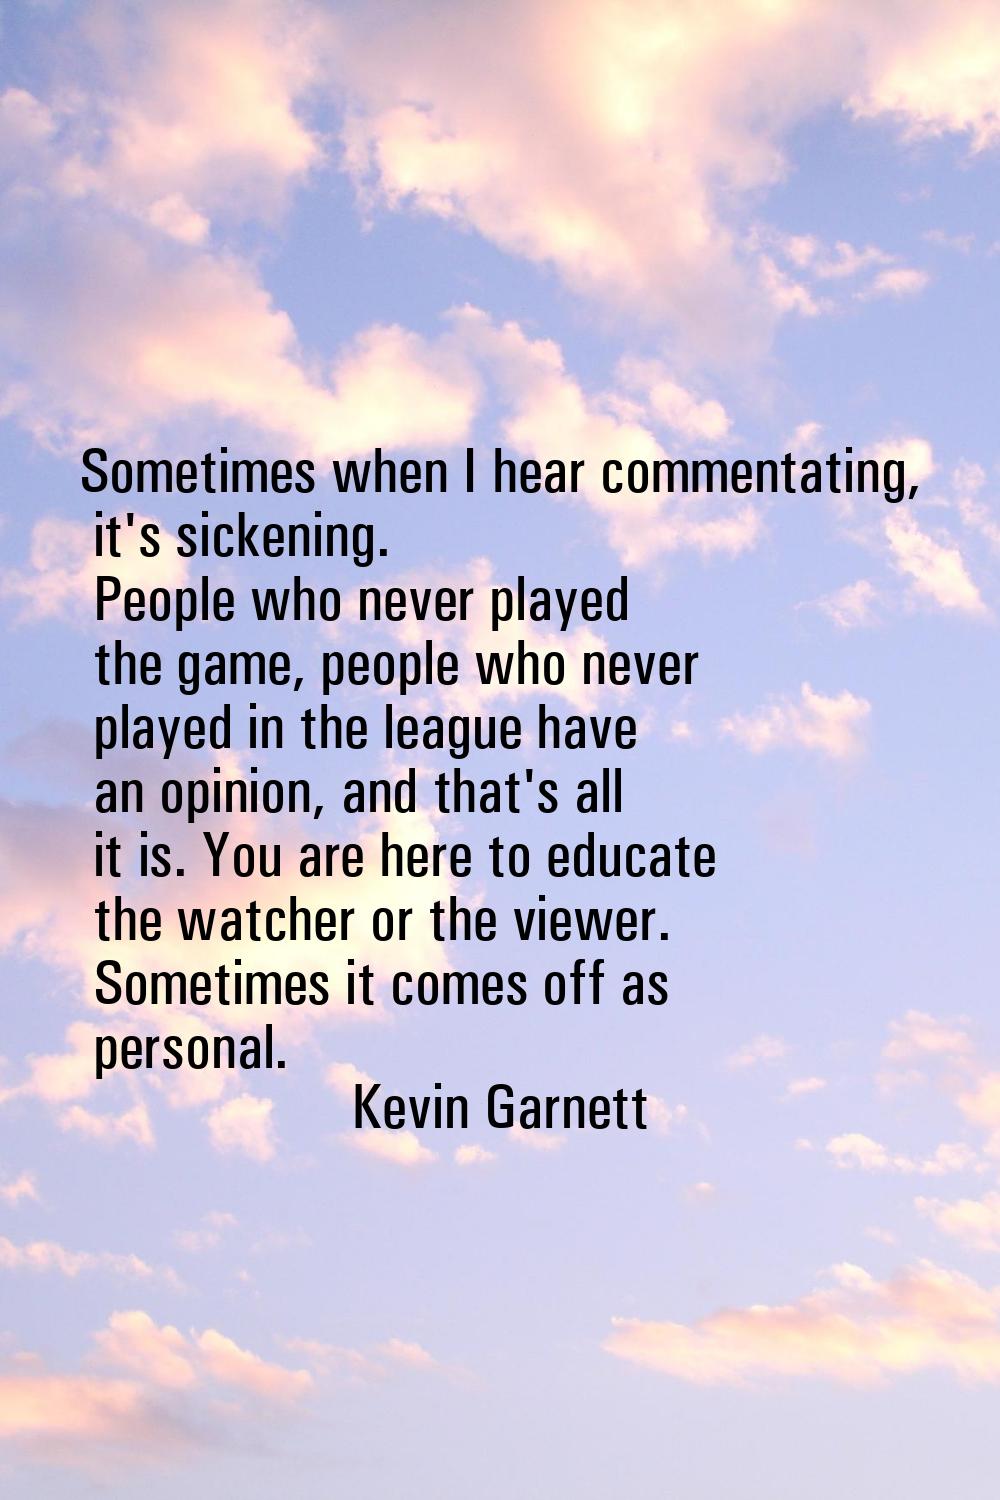 Sometimes when I hear commentating, it's sickening. People who never played the game, people who ne